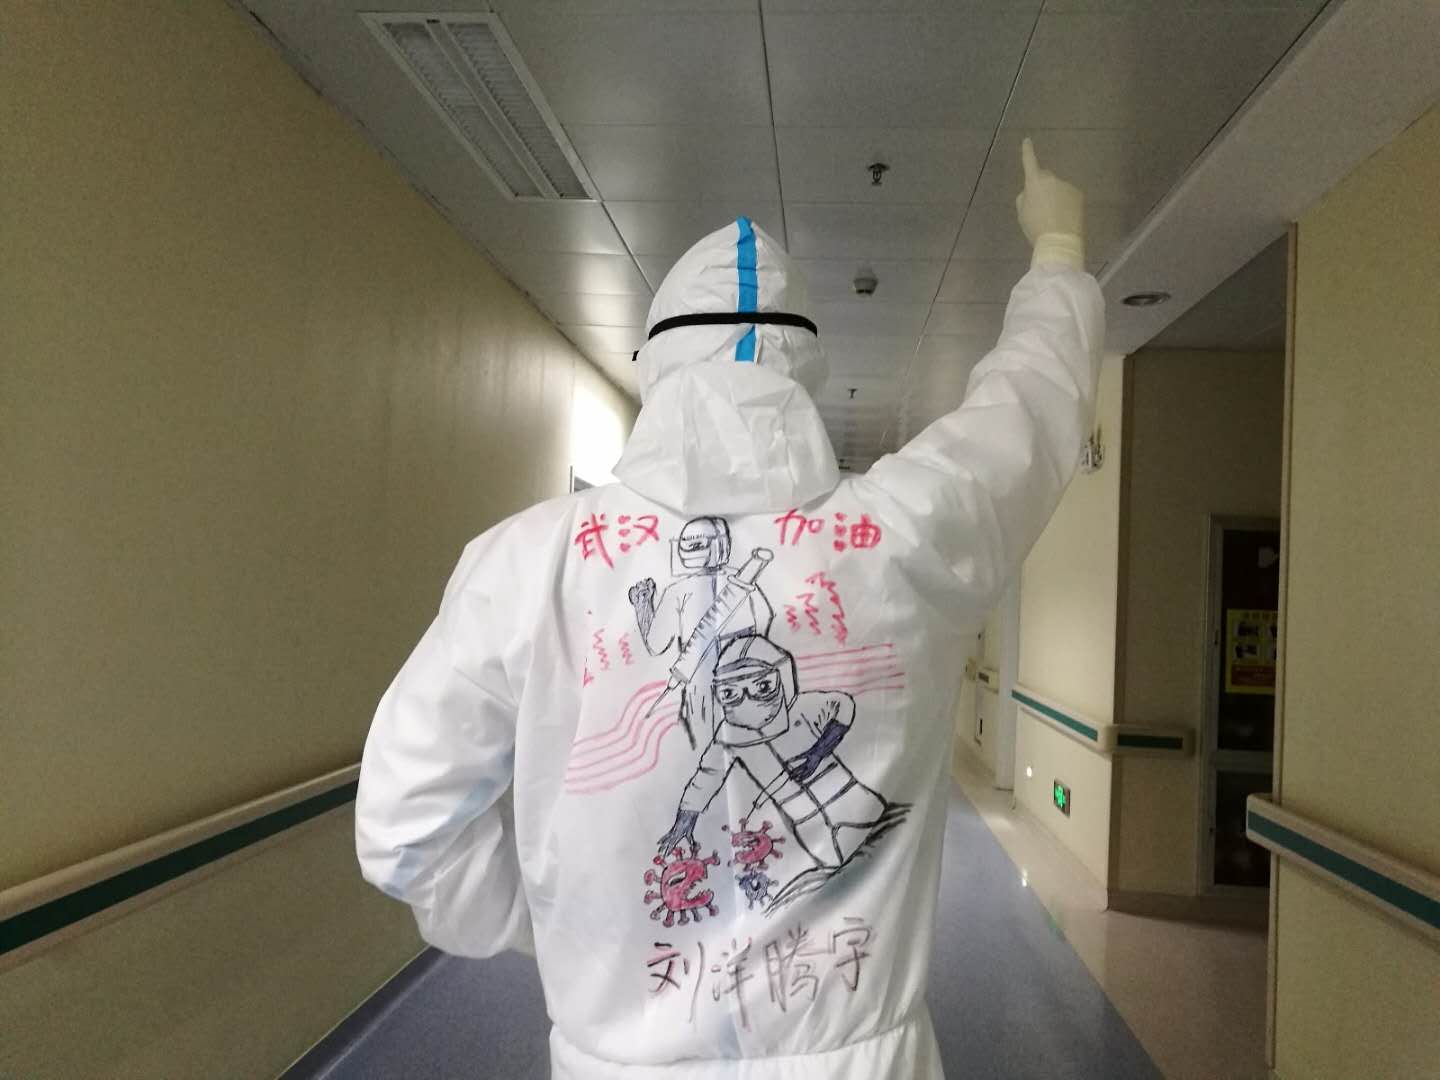 Post-90s frontline nurse draws on colleagues’ protective suits to boost morale